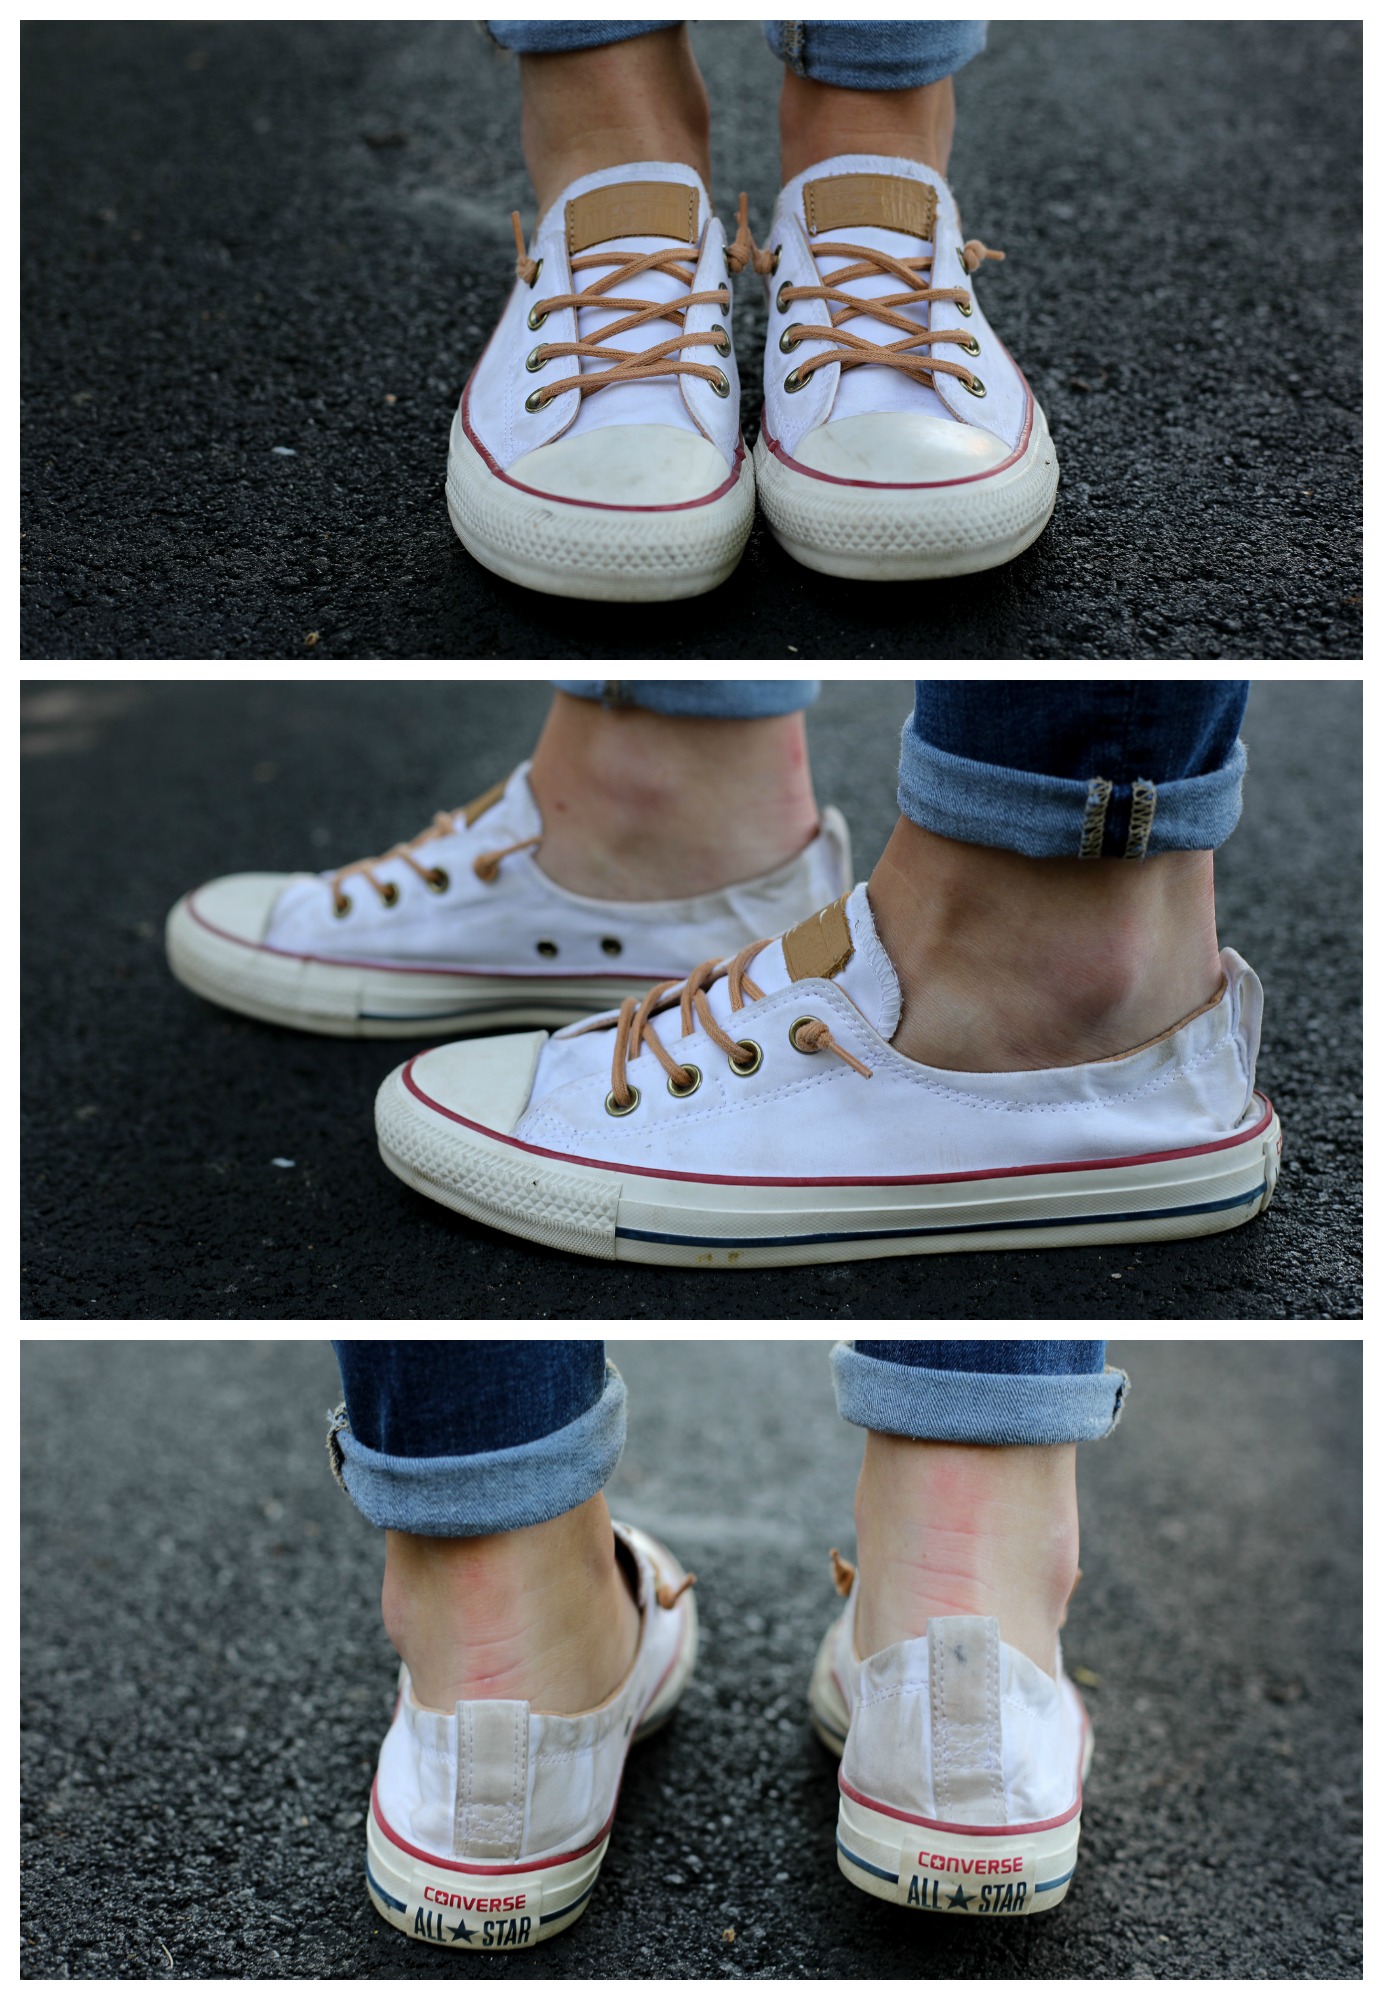 Superioridad seta . How to Clean Your Converse [6 Methods Put To The Test!] - Living in Yellow